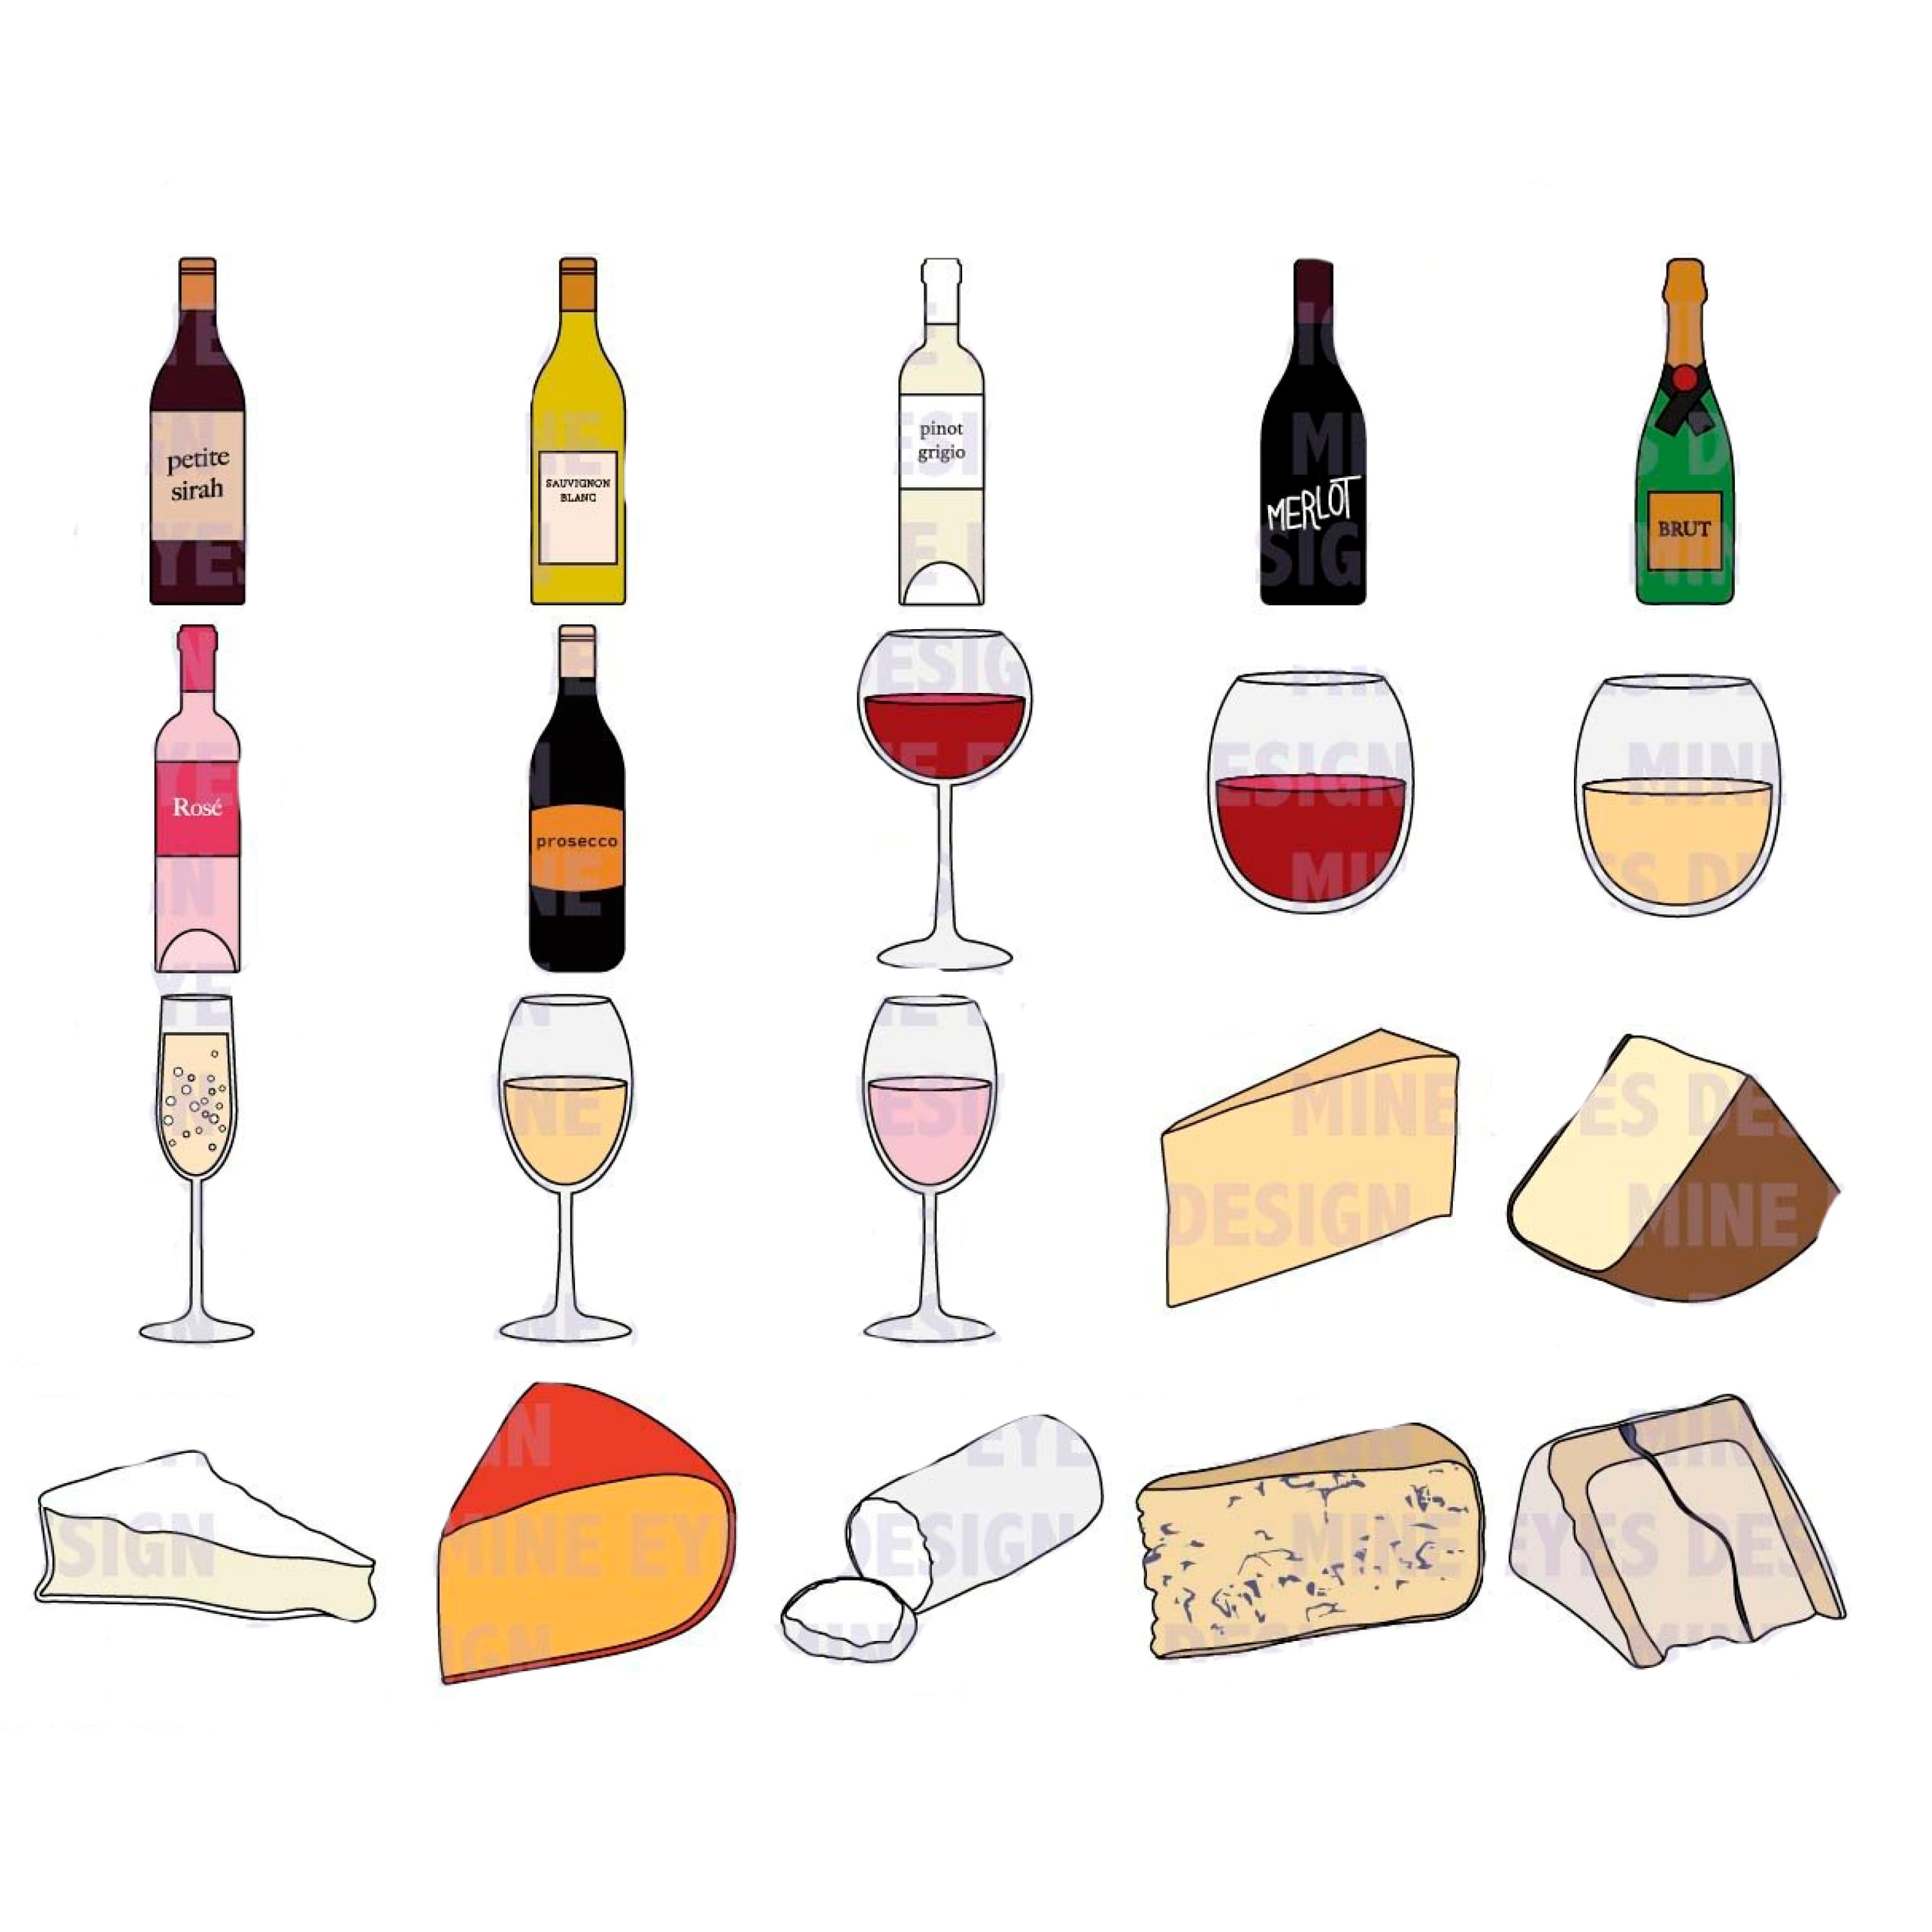 A set of gorgeous images of wine and cheese.